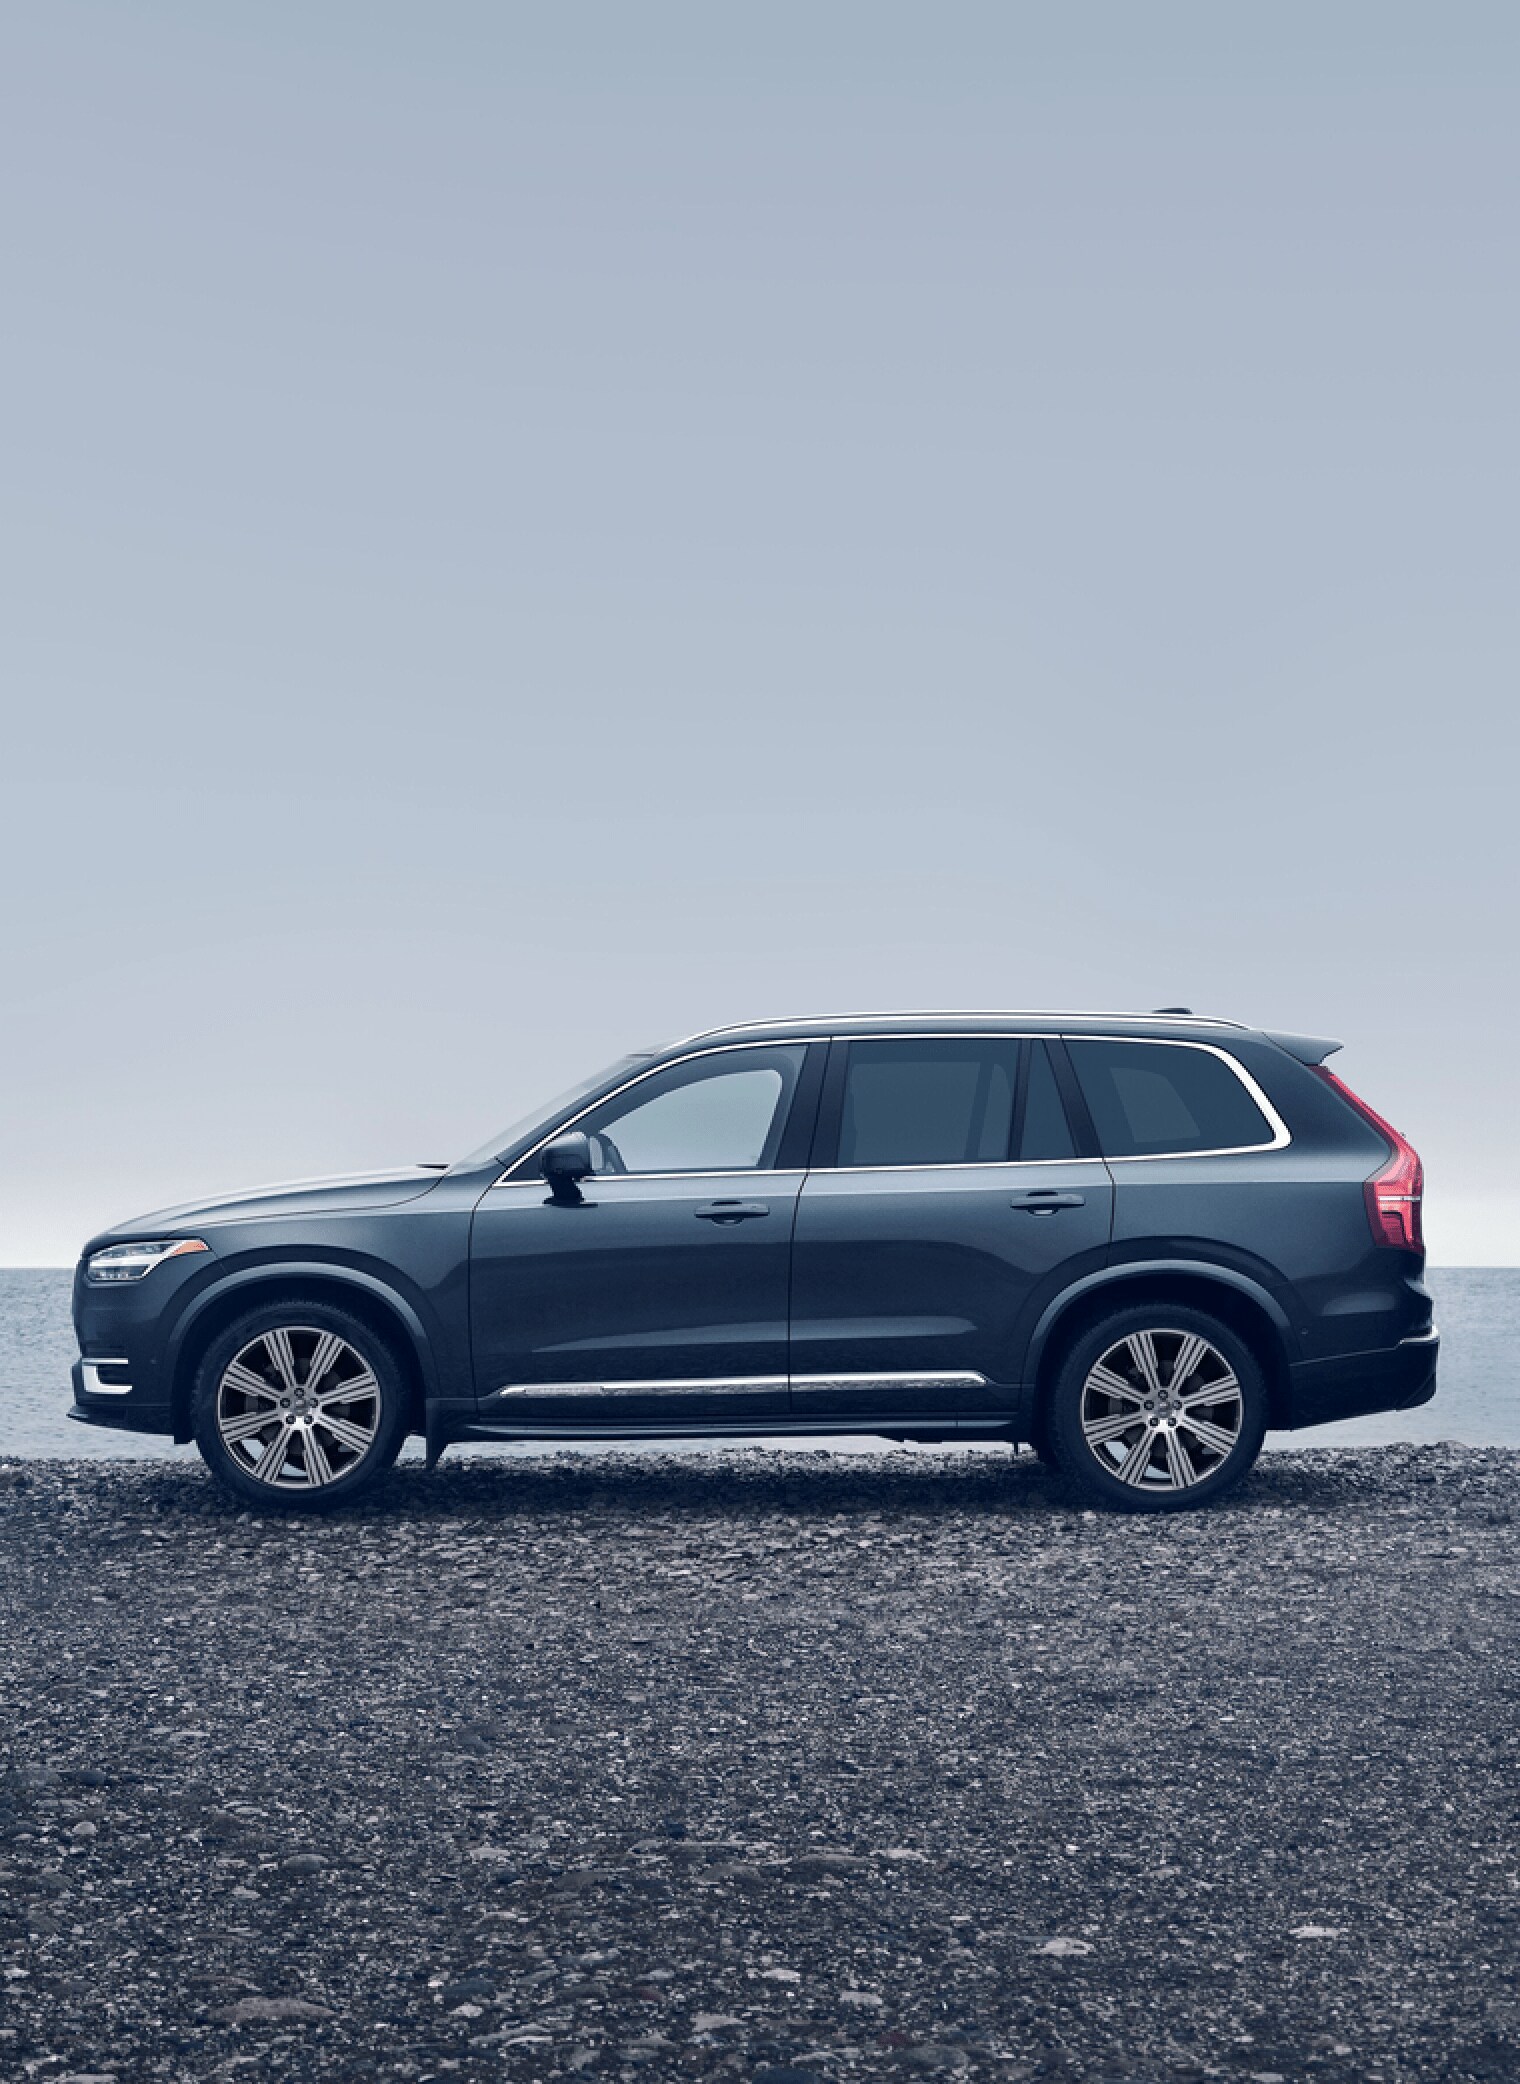 Volvo XC90 T5 Vs. T6: What Is The Difference?